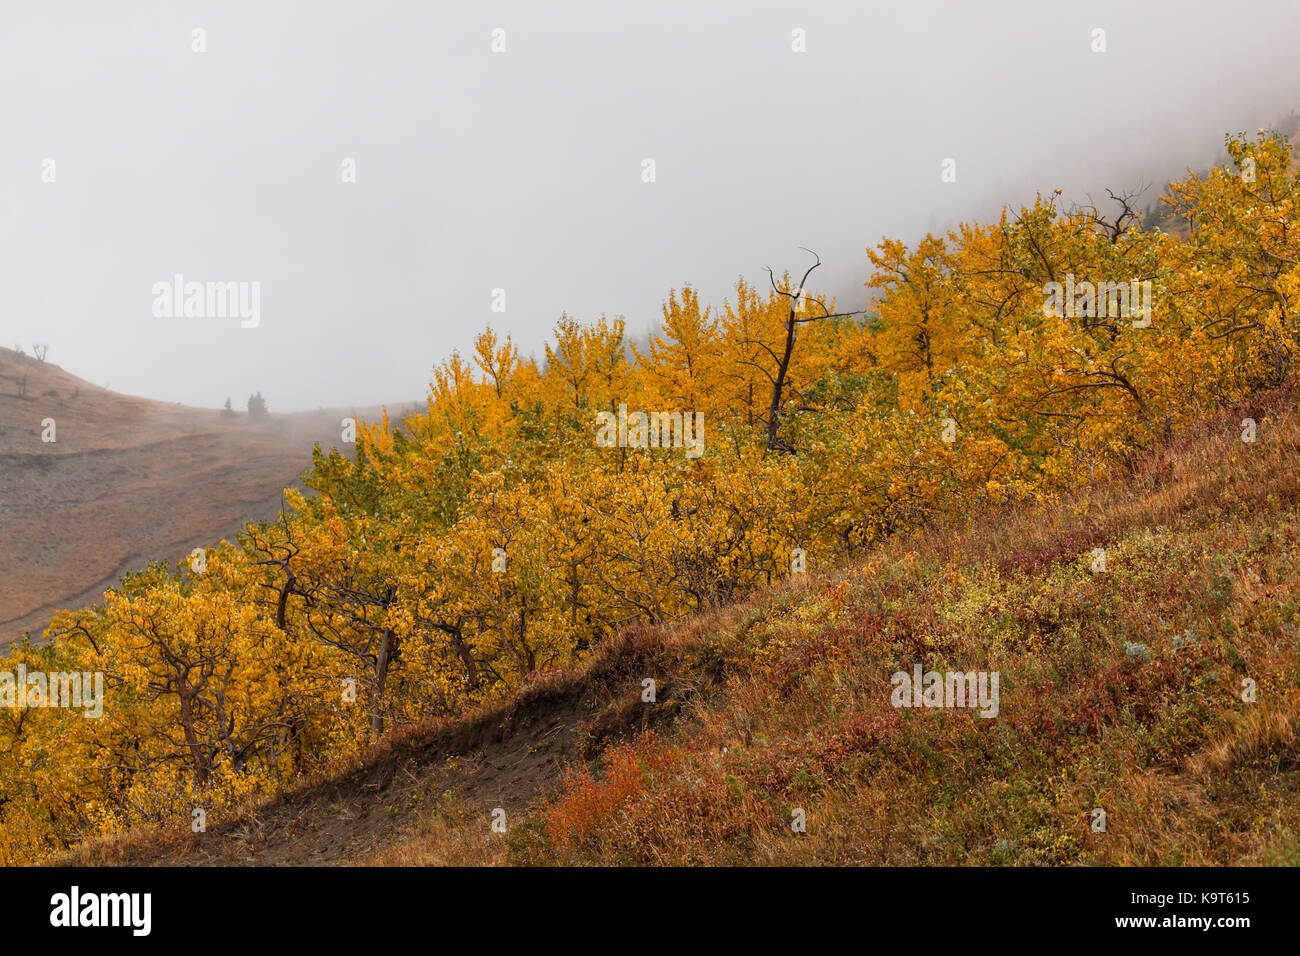 Trees and brush in various shades of gold and green growing up a hillside with seasonal fog creeping in the background. Stock Photo